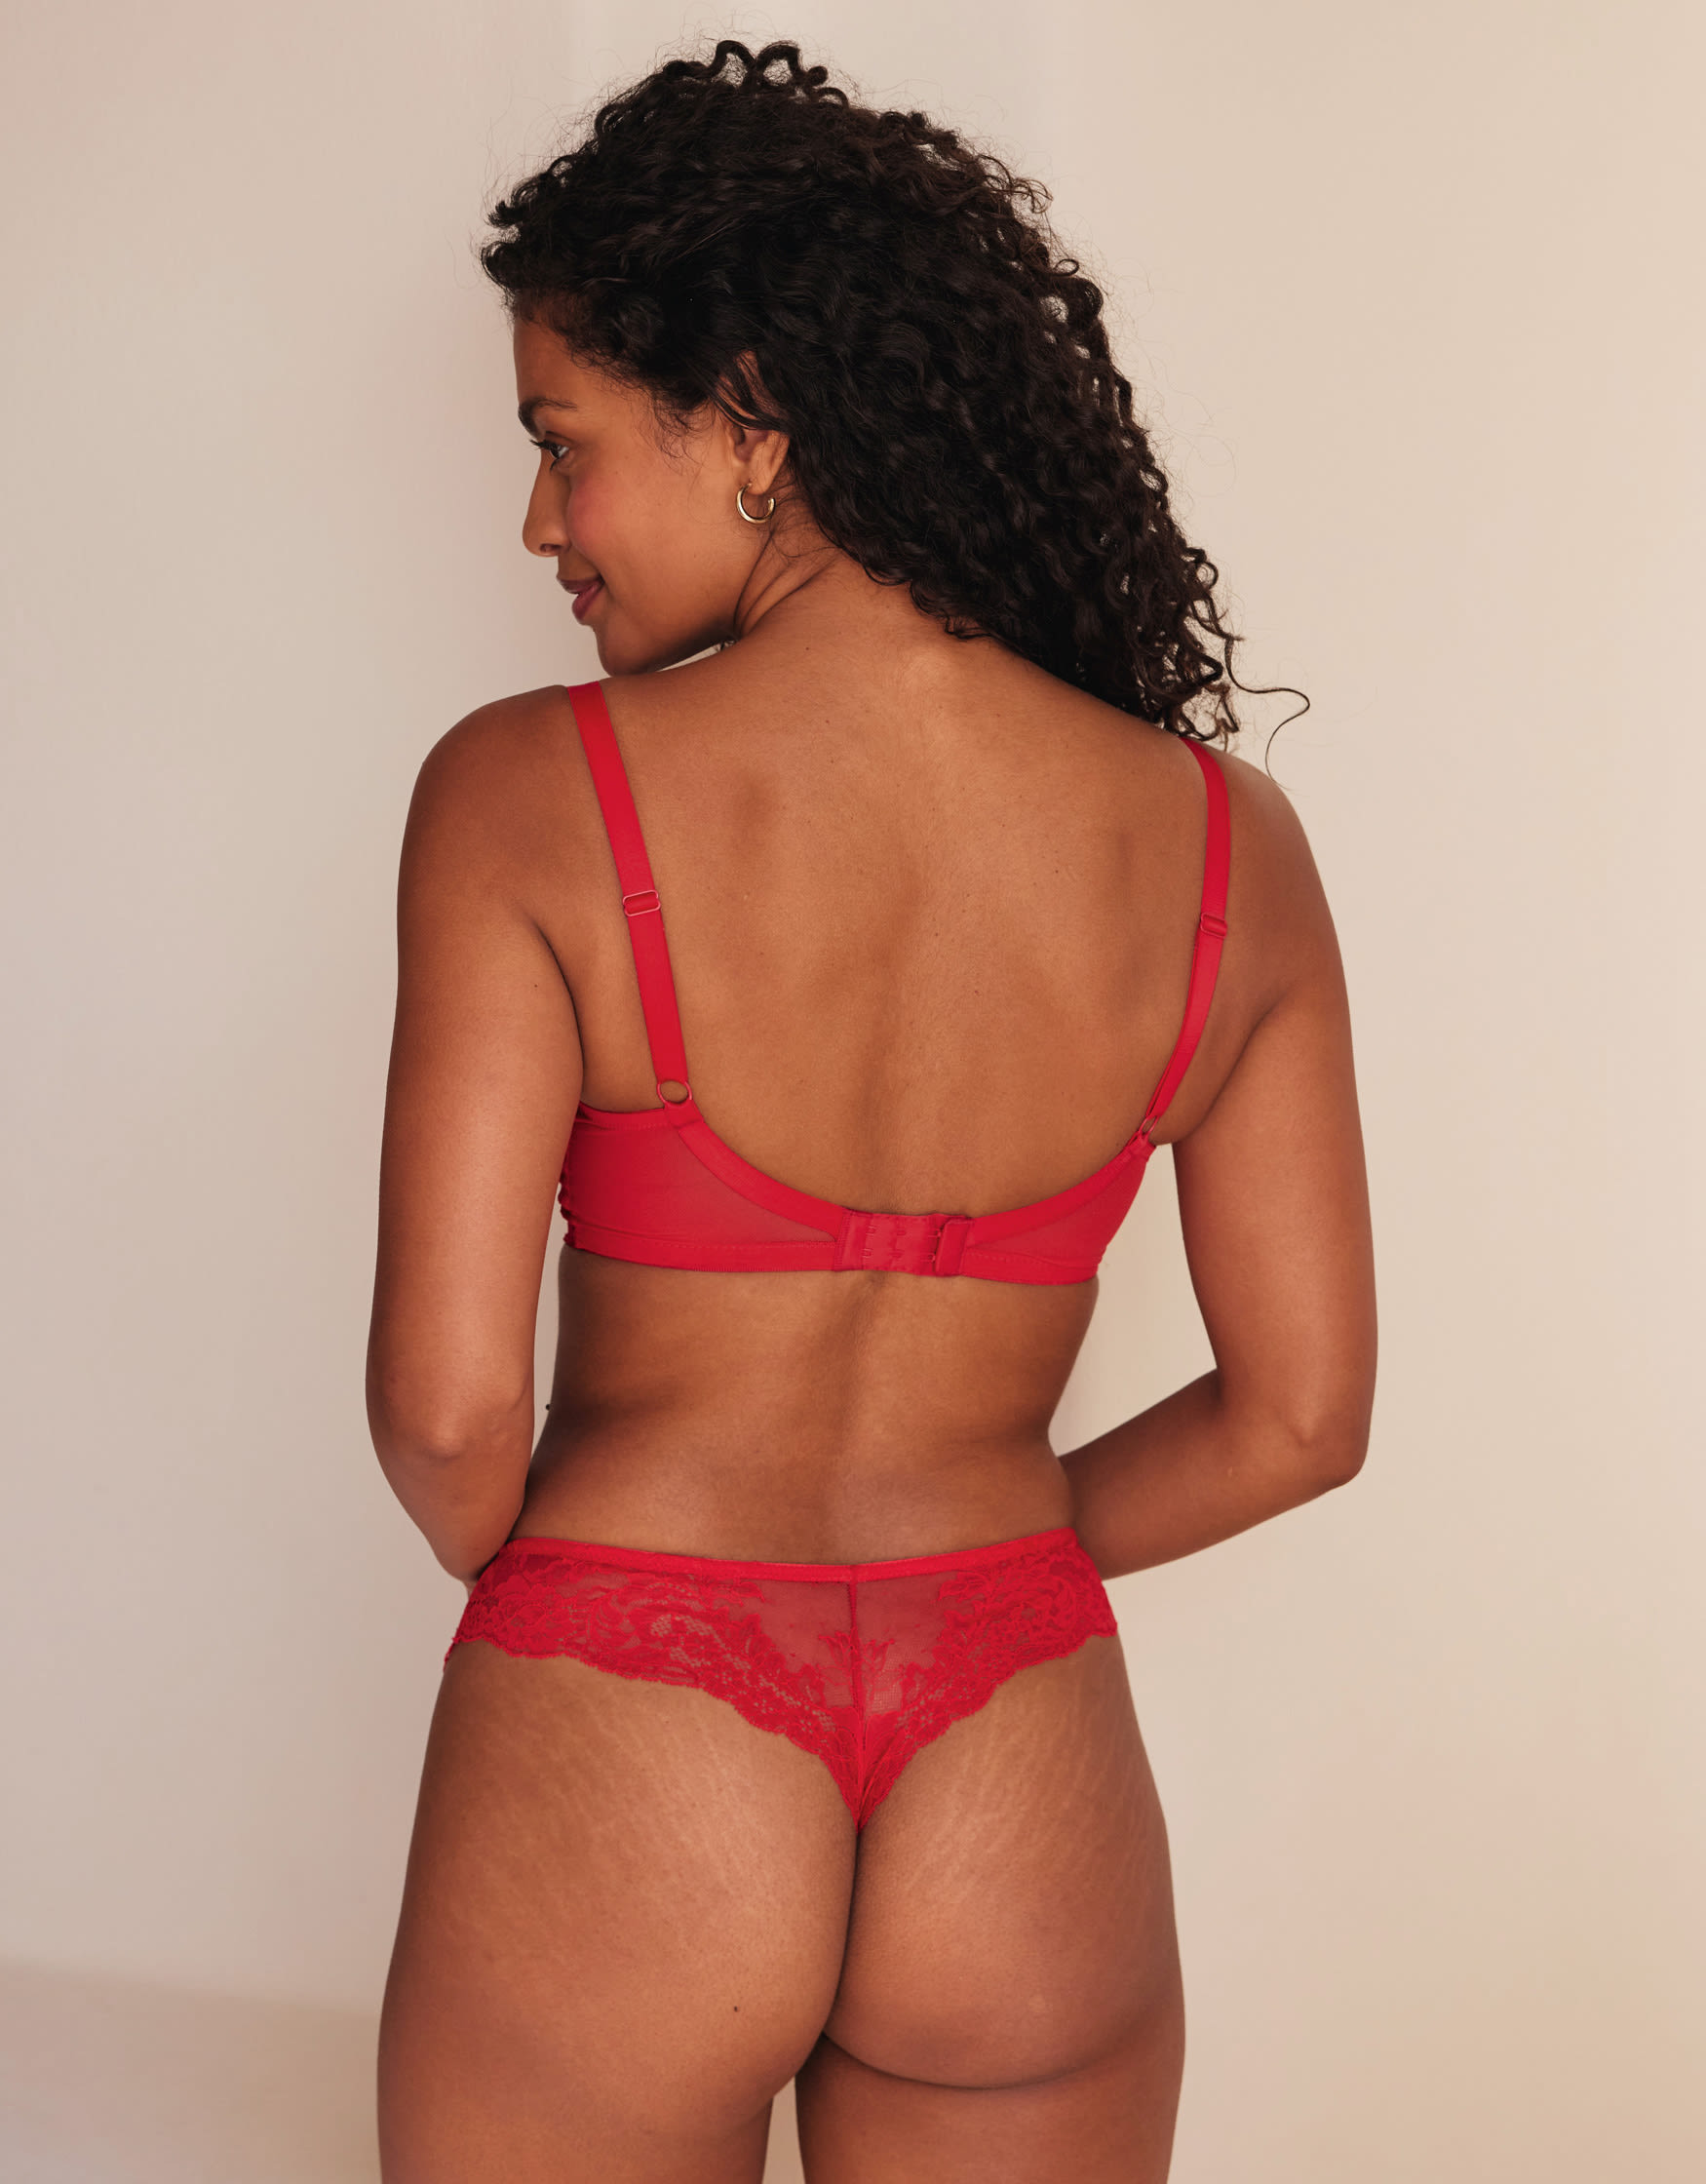 Beautiful Red Lace Female Secular Gentle Bra, Underwear And Copy